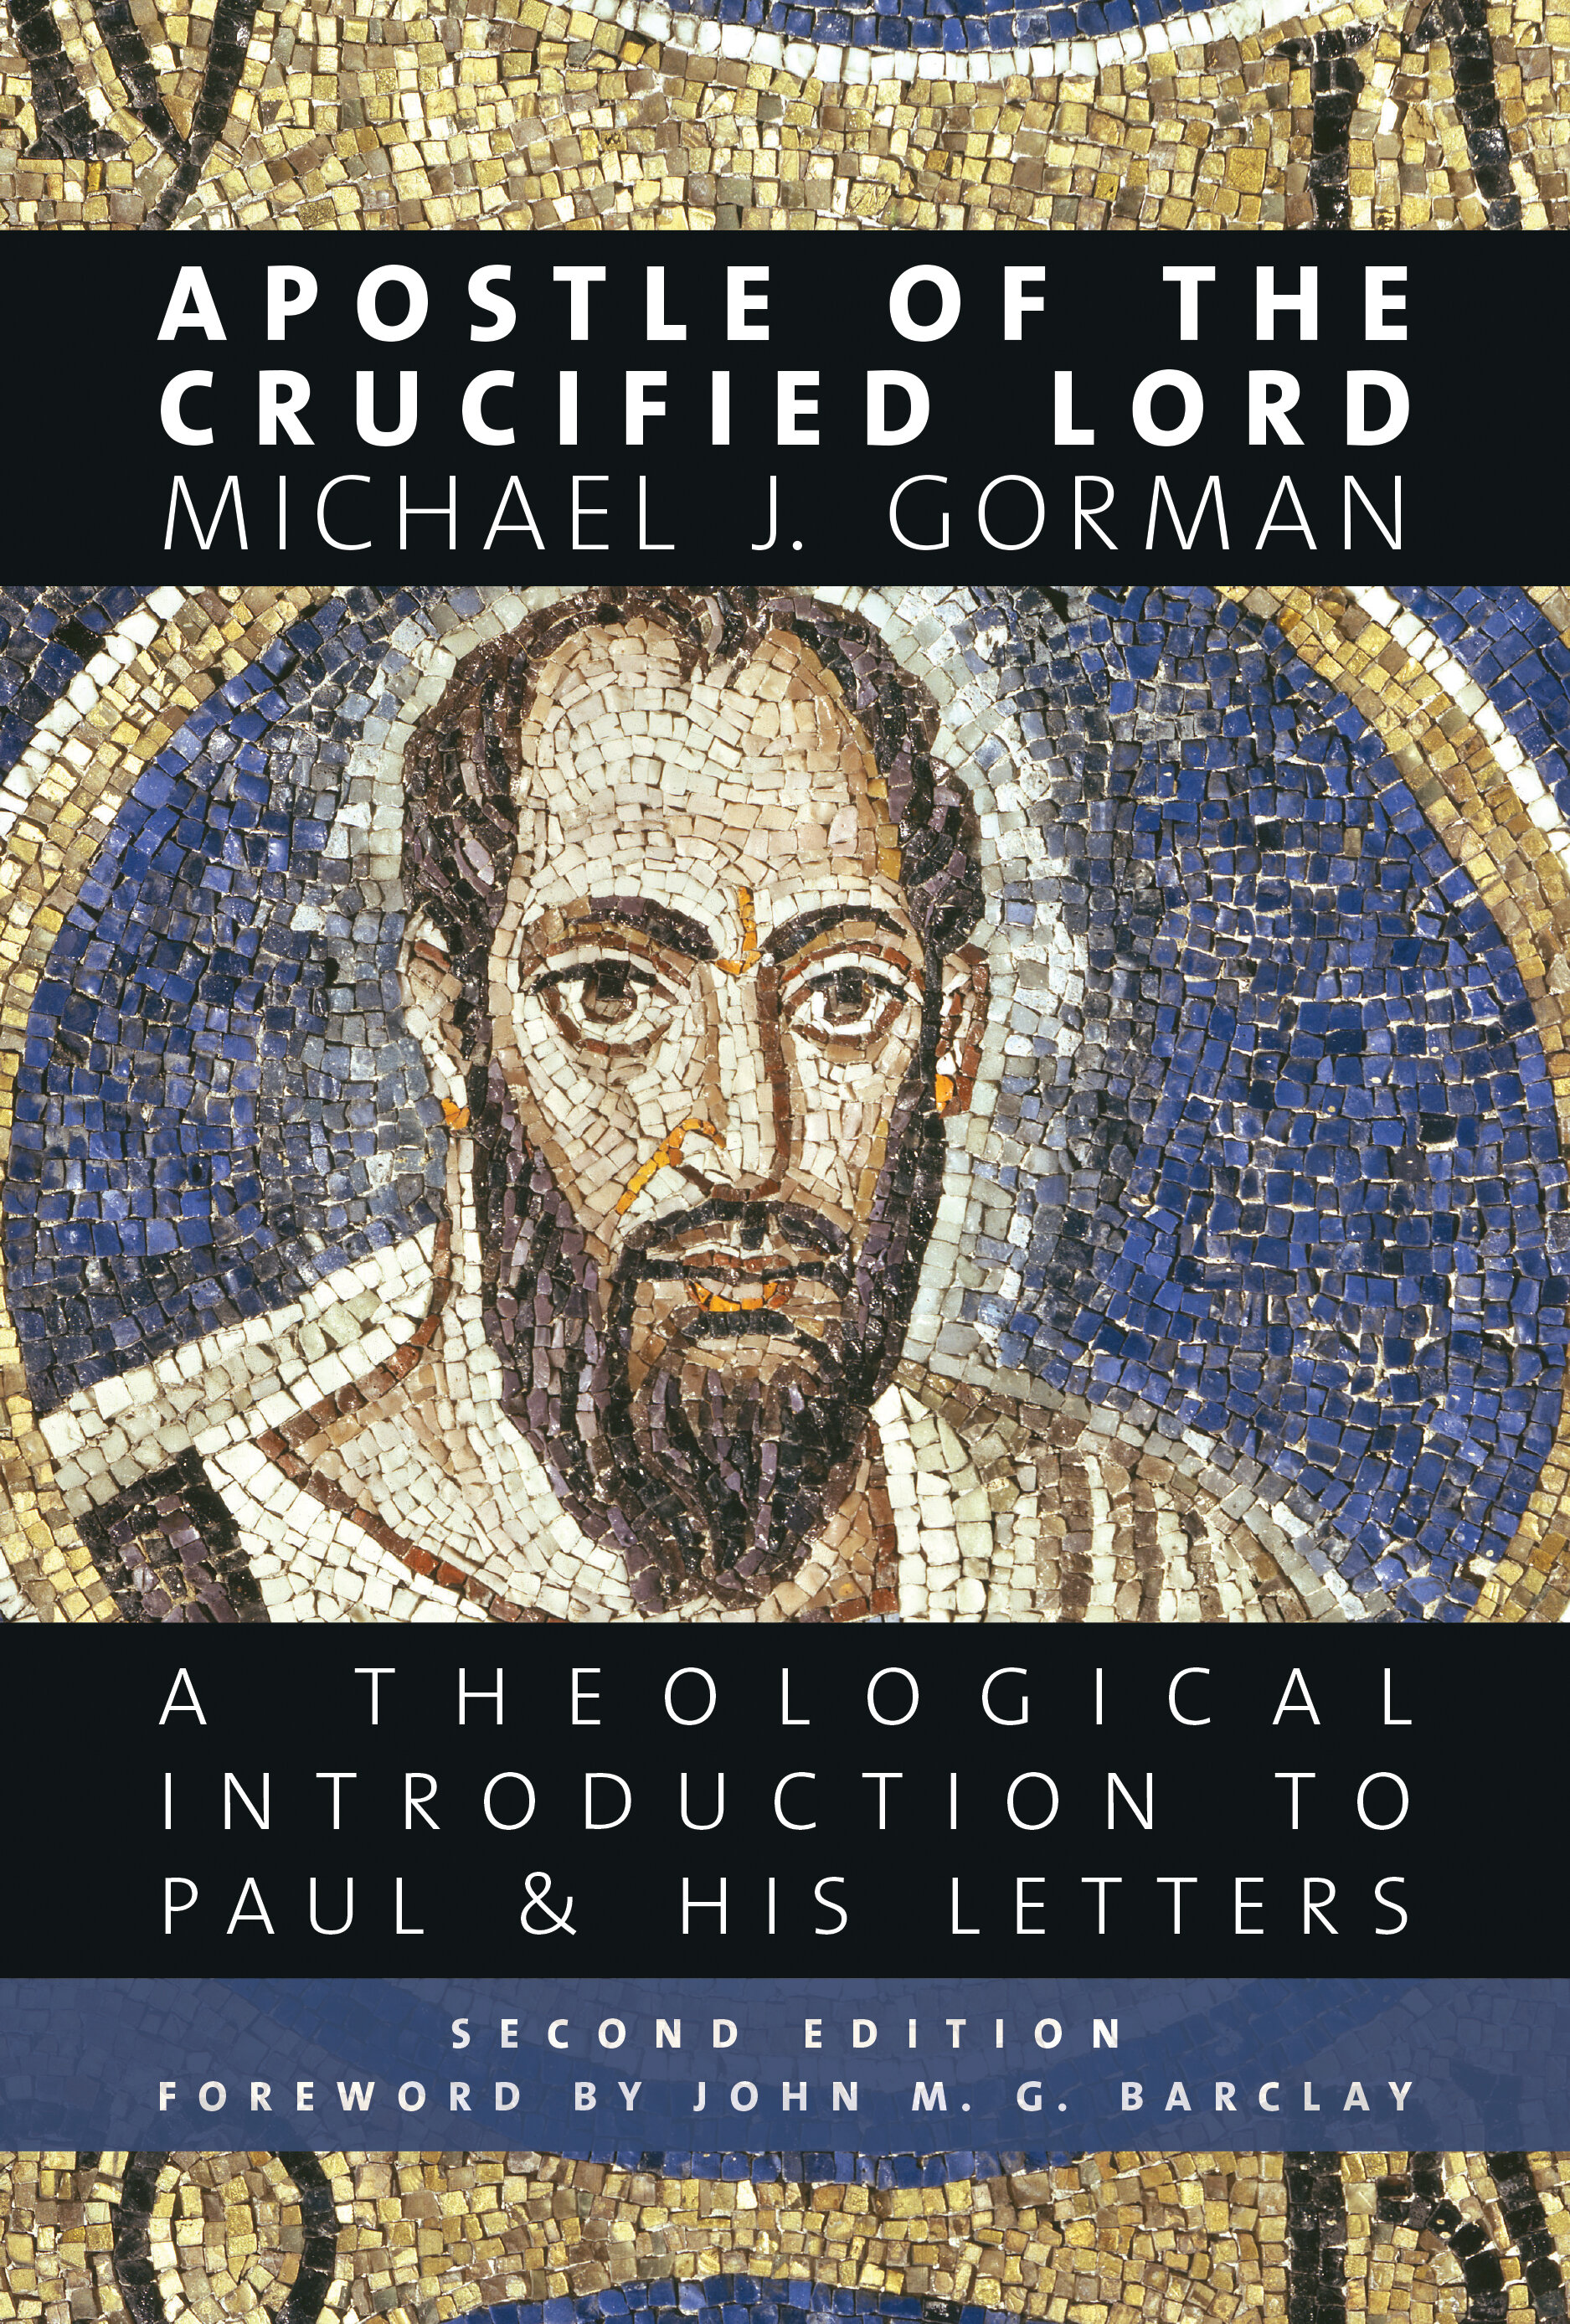 Apostle of the Crucified Lord: A Theological Introduction to Paul and His Letters, 2nd ed.